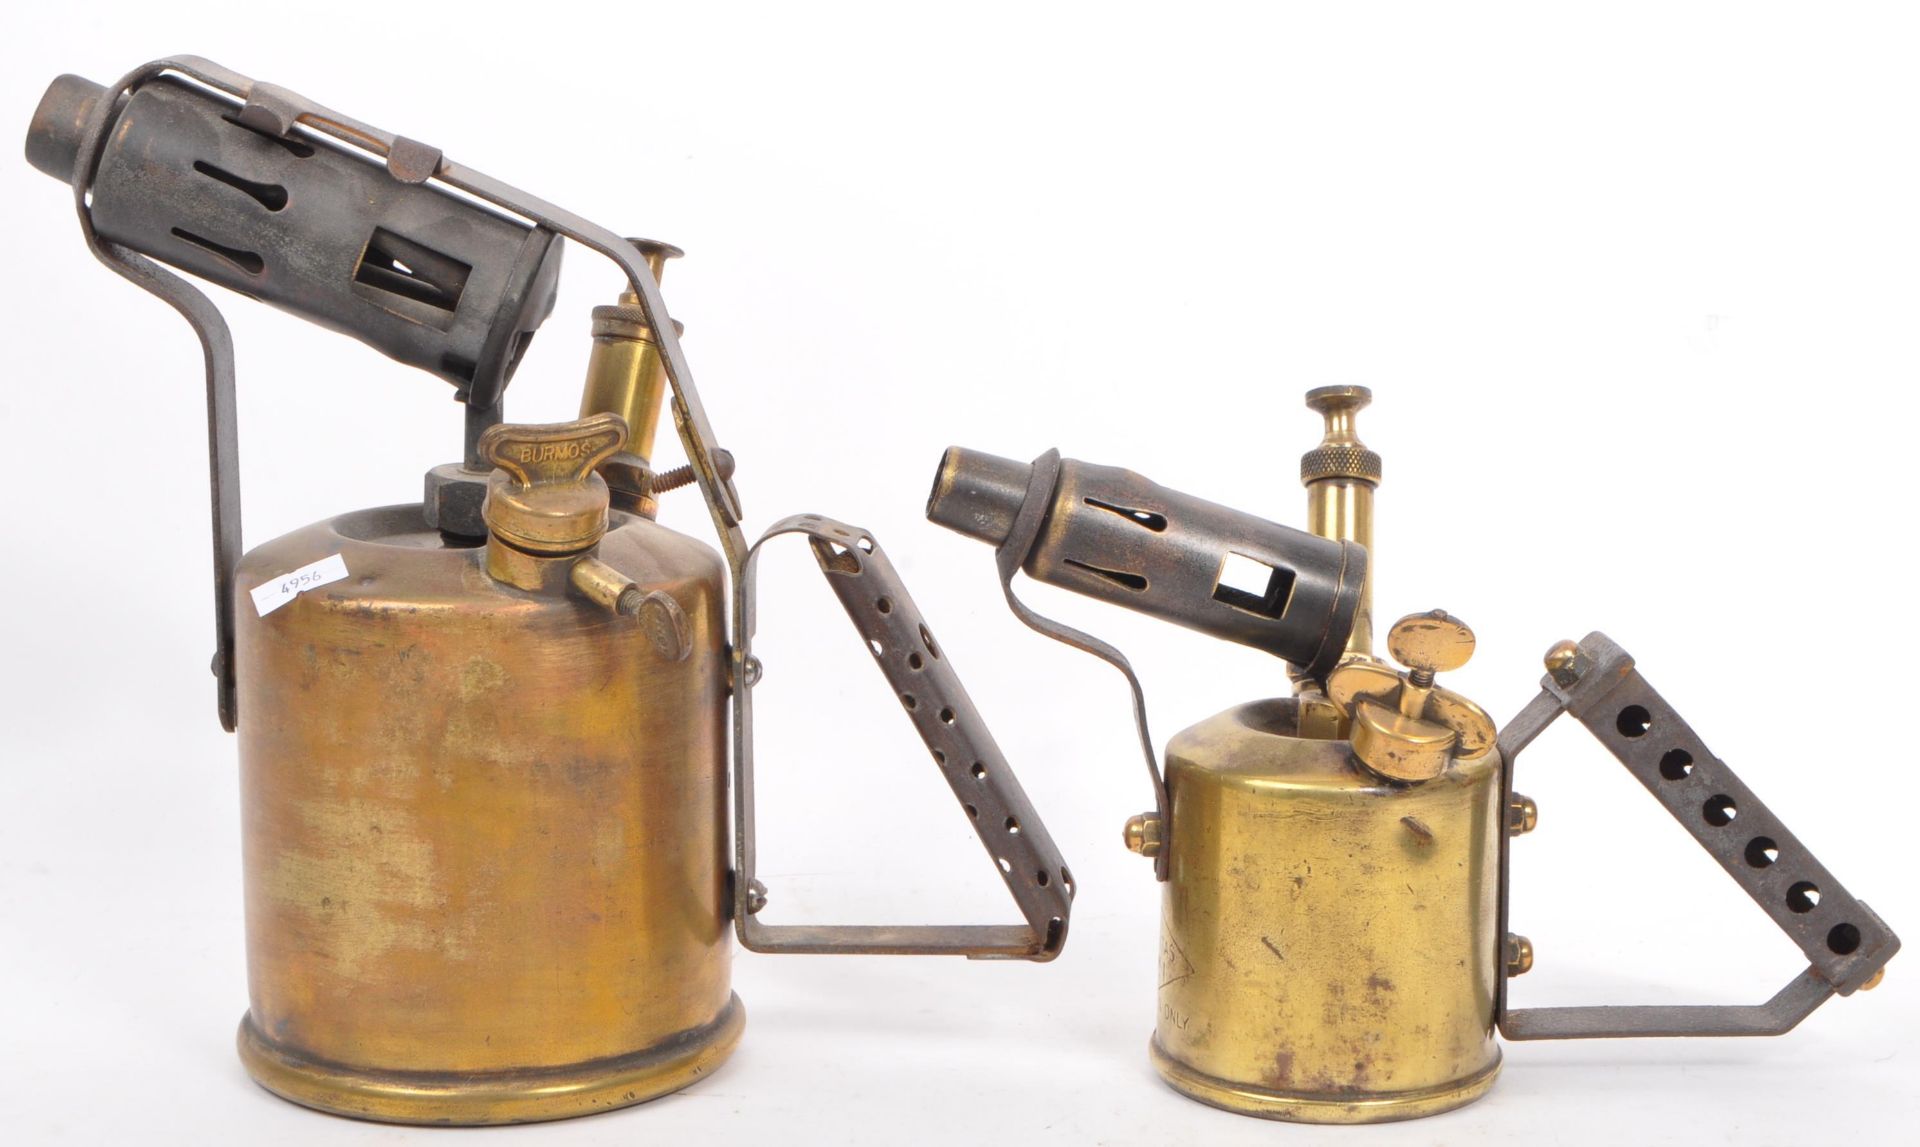 TWO VINTAGE 20TH CENTURY ENGLISH BRASS BLOW TORCHES - Image 3 of 5